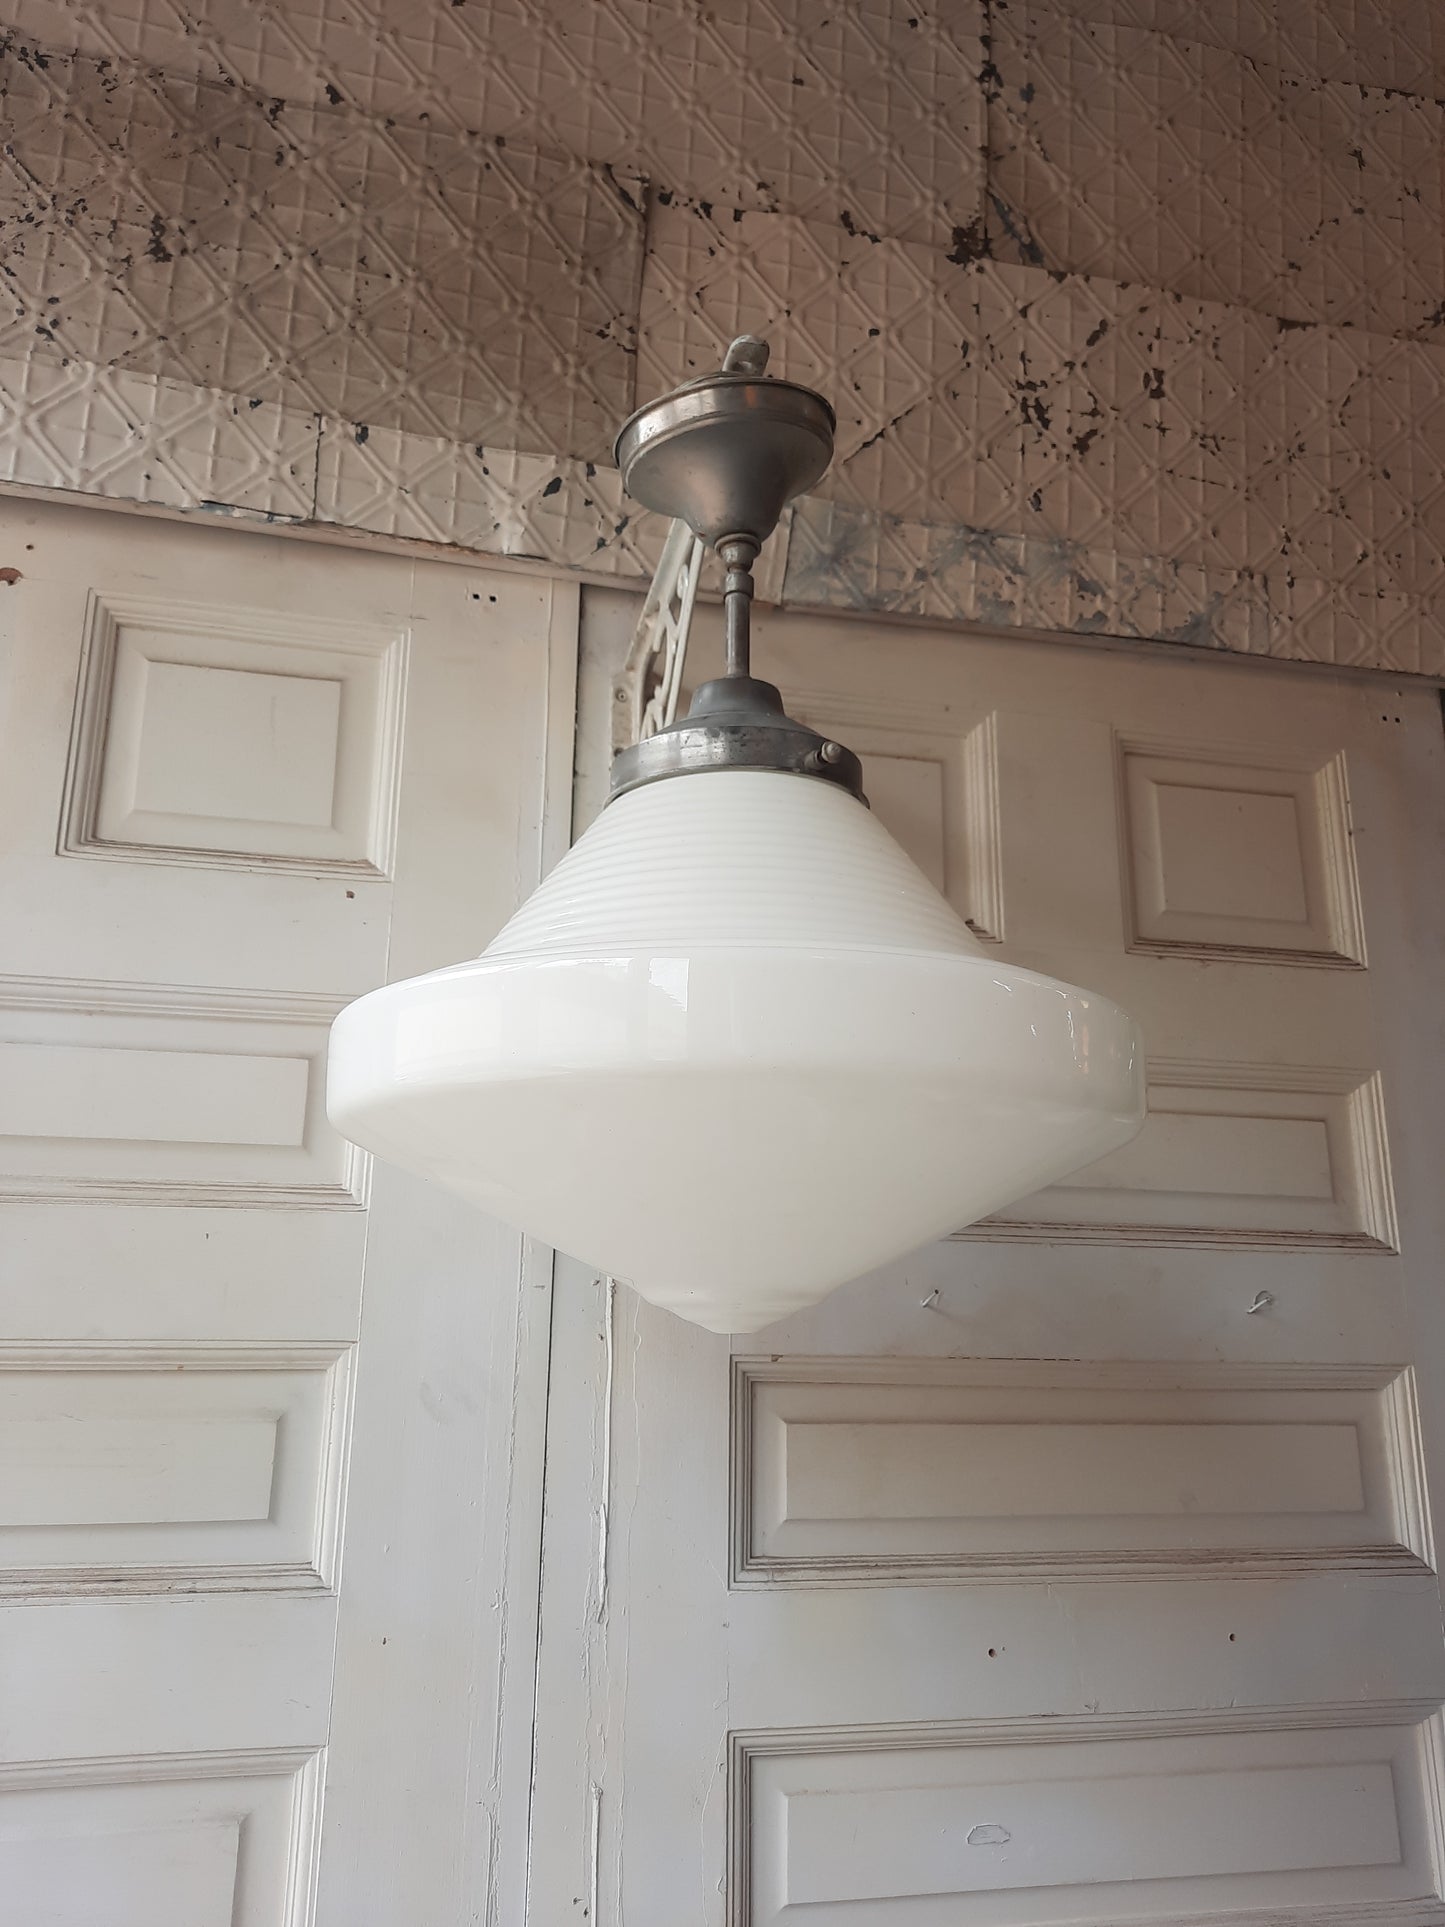 Large Art Deco Schoolhouse Light with Milk Glass Globe, Art Deco Style Silver and White Light